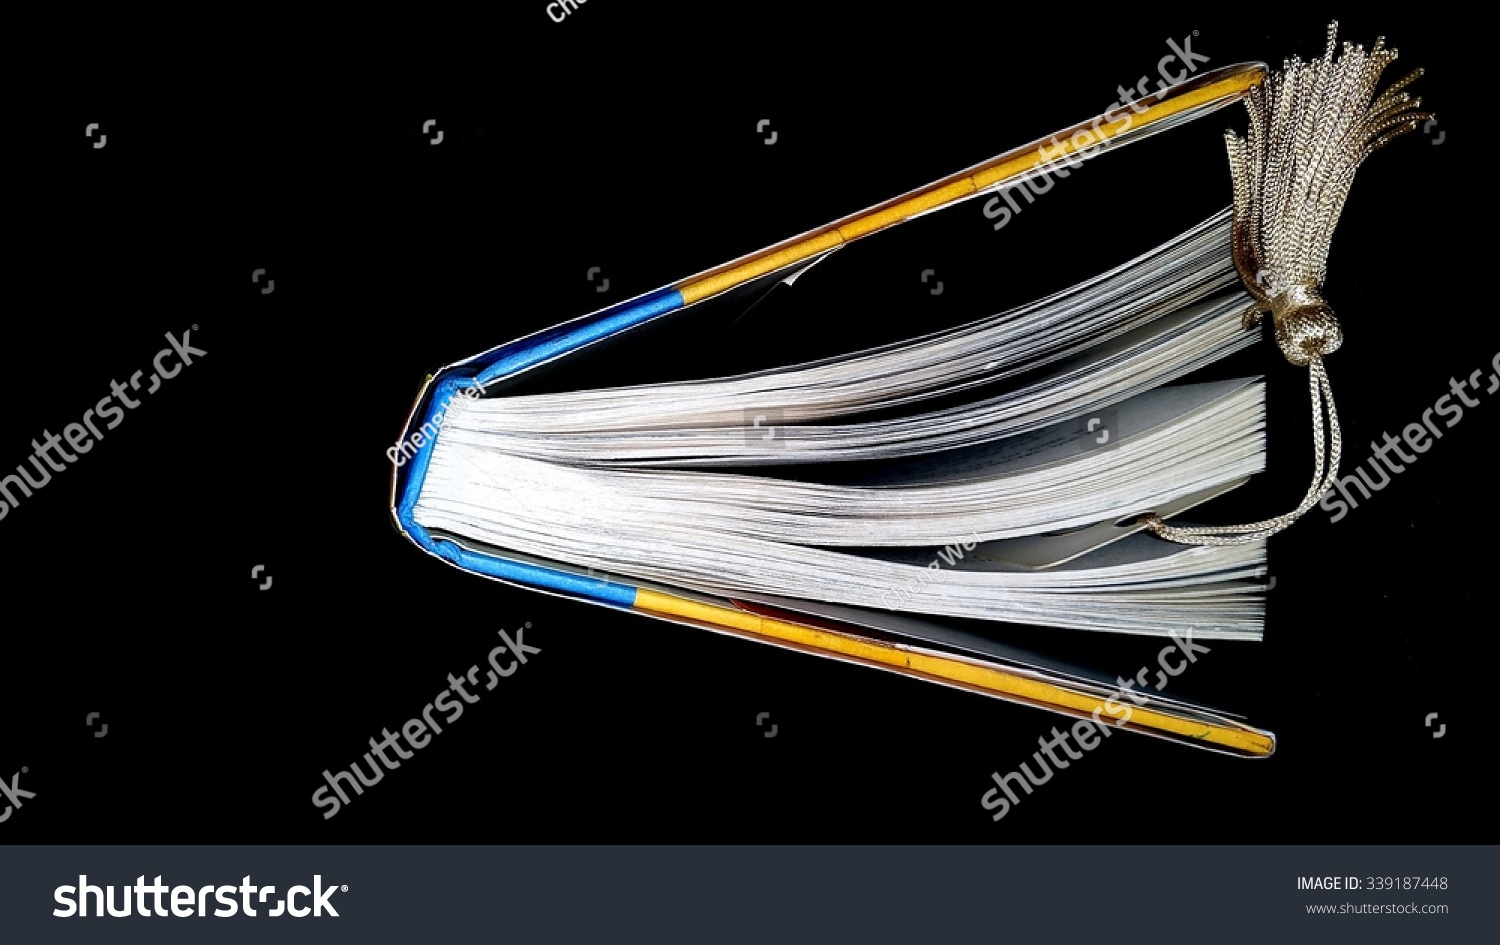 A book with dust Jacket hardcover flies and comes with a bookmark inside the pages. Background in black illustrates the limitless boundary.  #339187448